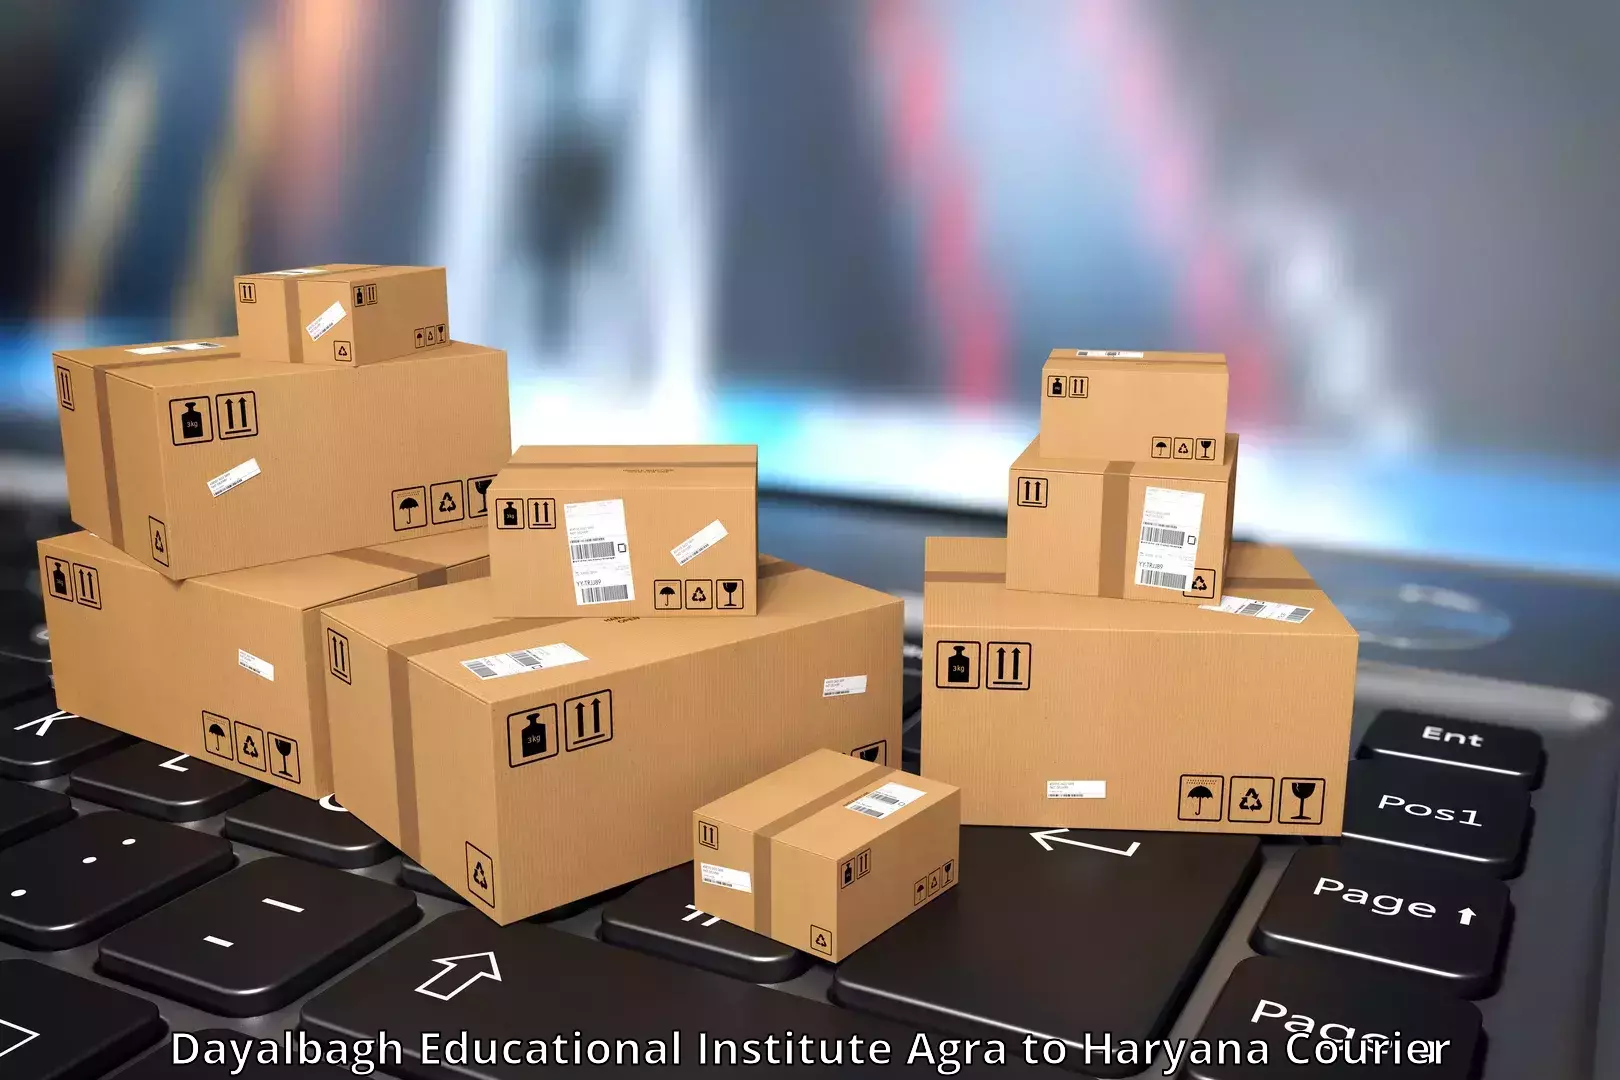 Affordable shipping rates in Dayalbagh Educational Institute Agra to Chaudhary Charan Singh Haryana Agricultural University Hisar